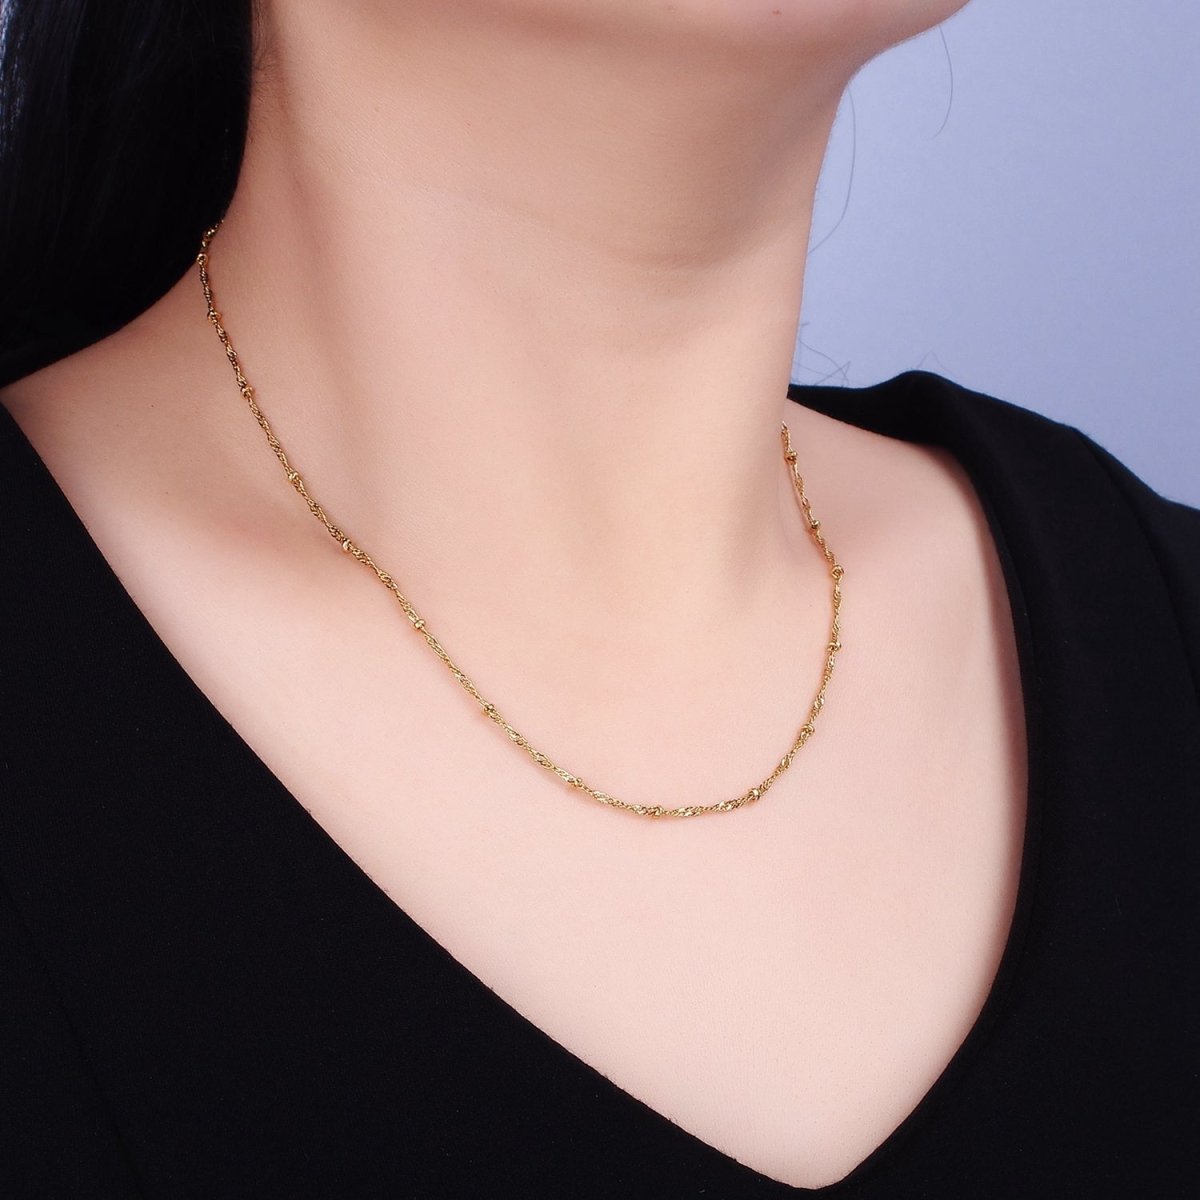 24K Gold Filled Twisted Chain With Gold Beads For Wholesale Necklace Dainty Satellite Chain Jewelry Making Supplies | WA-1847 WA-1848 Clearance Pricing - DLUXCA